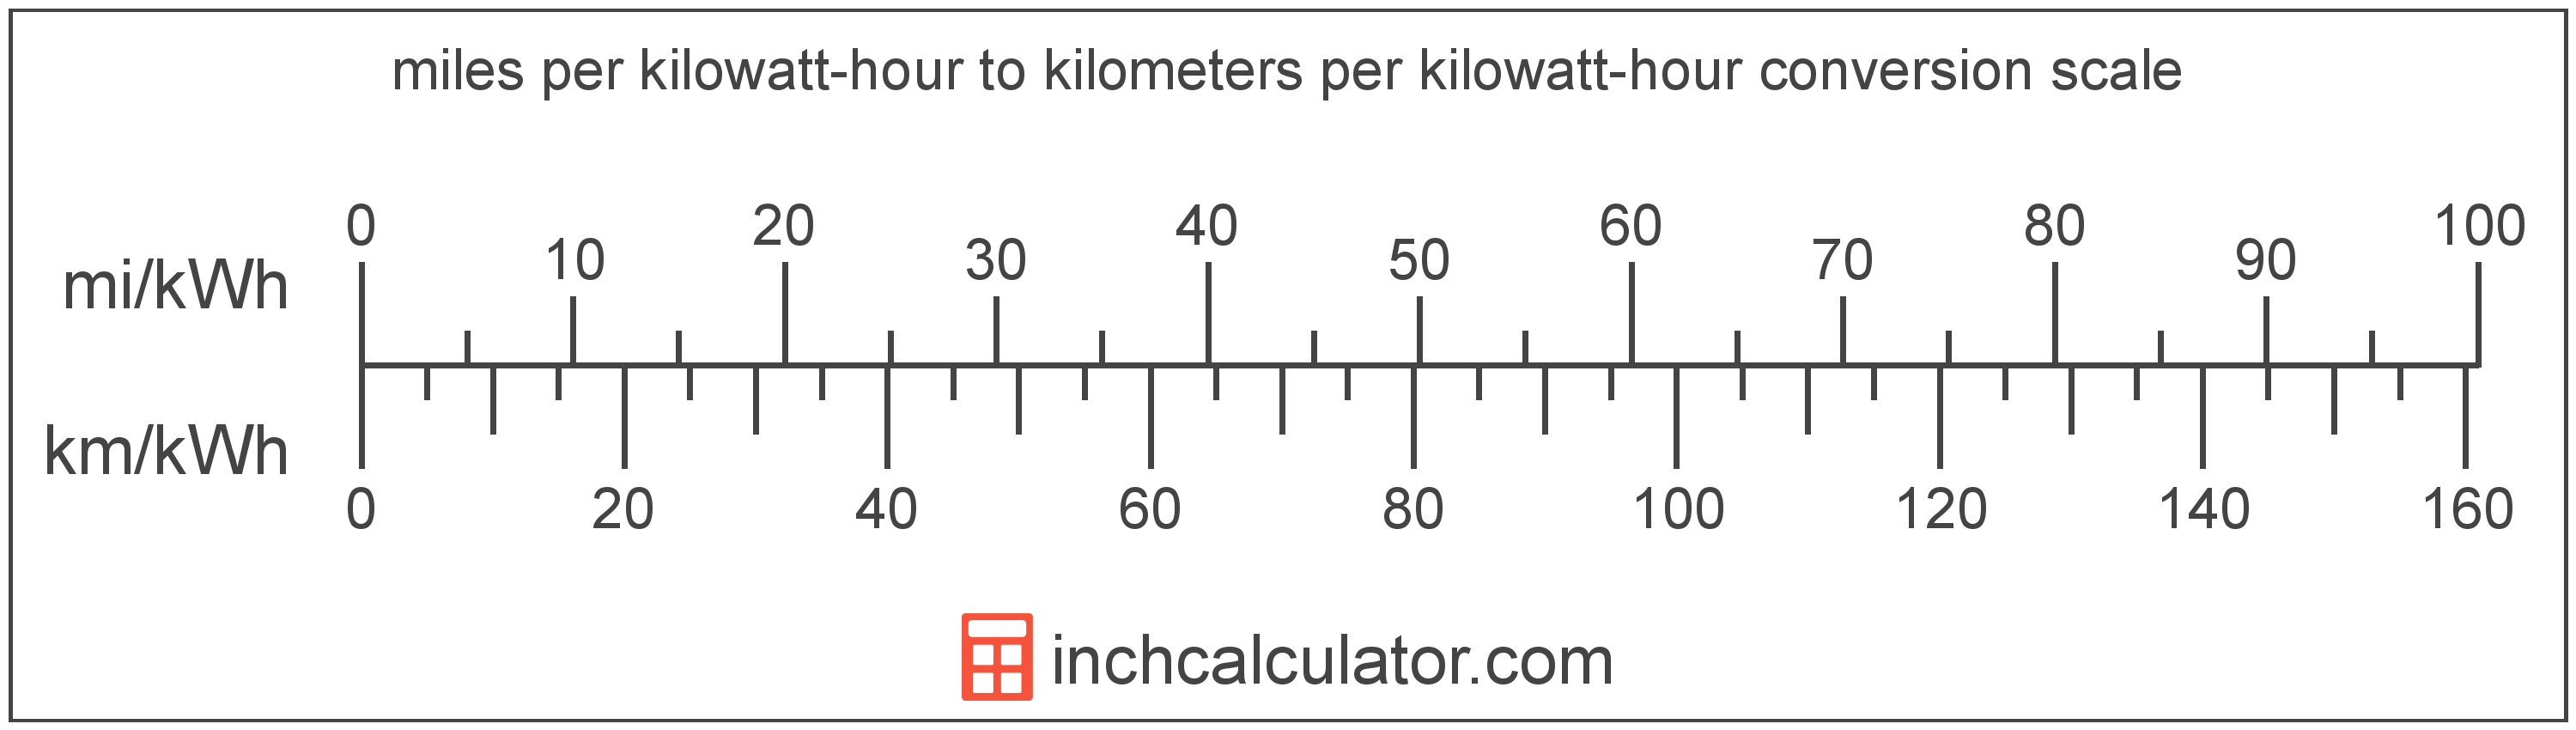 kwh to unit calculator